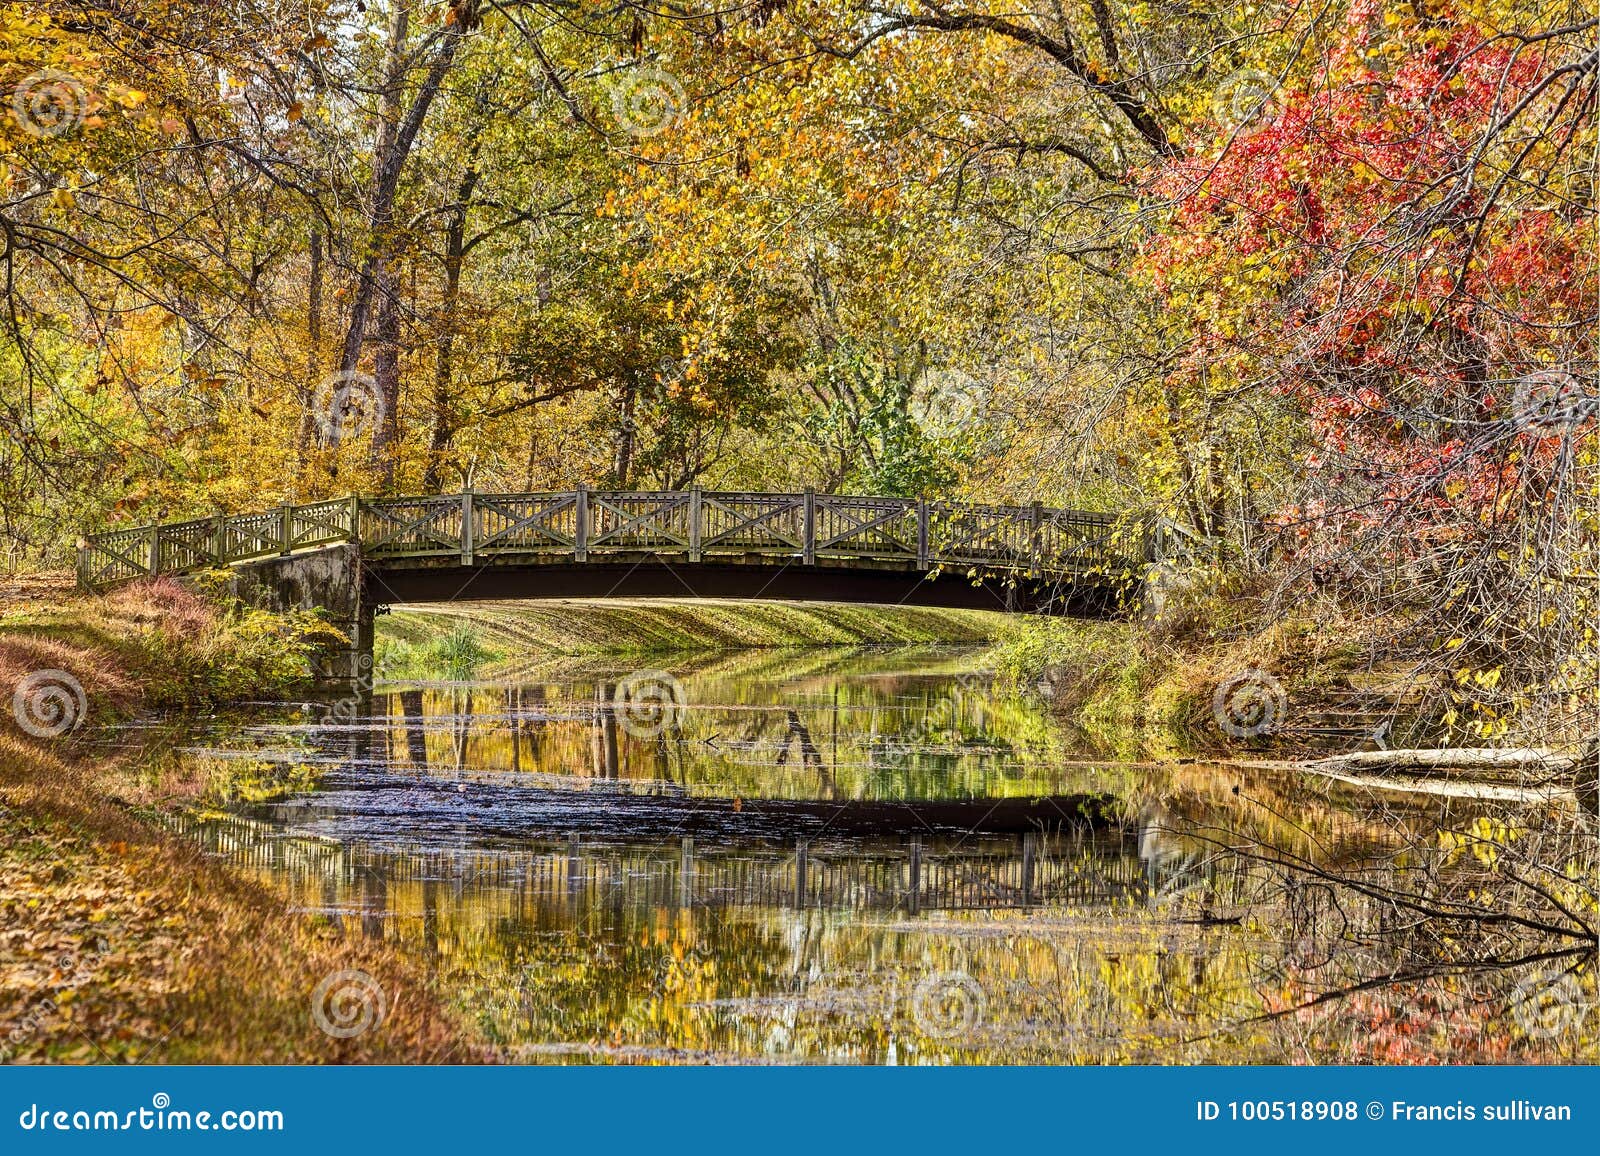 Colorful Autumn Foliage and Bridge Reflected in Water Stock Photo ...